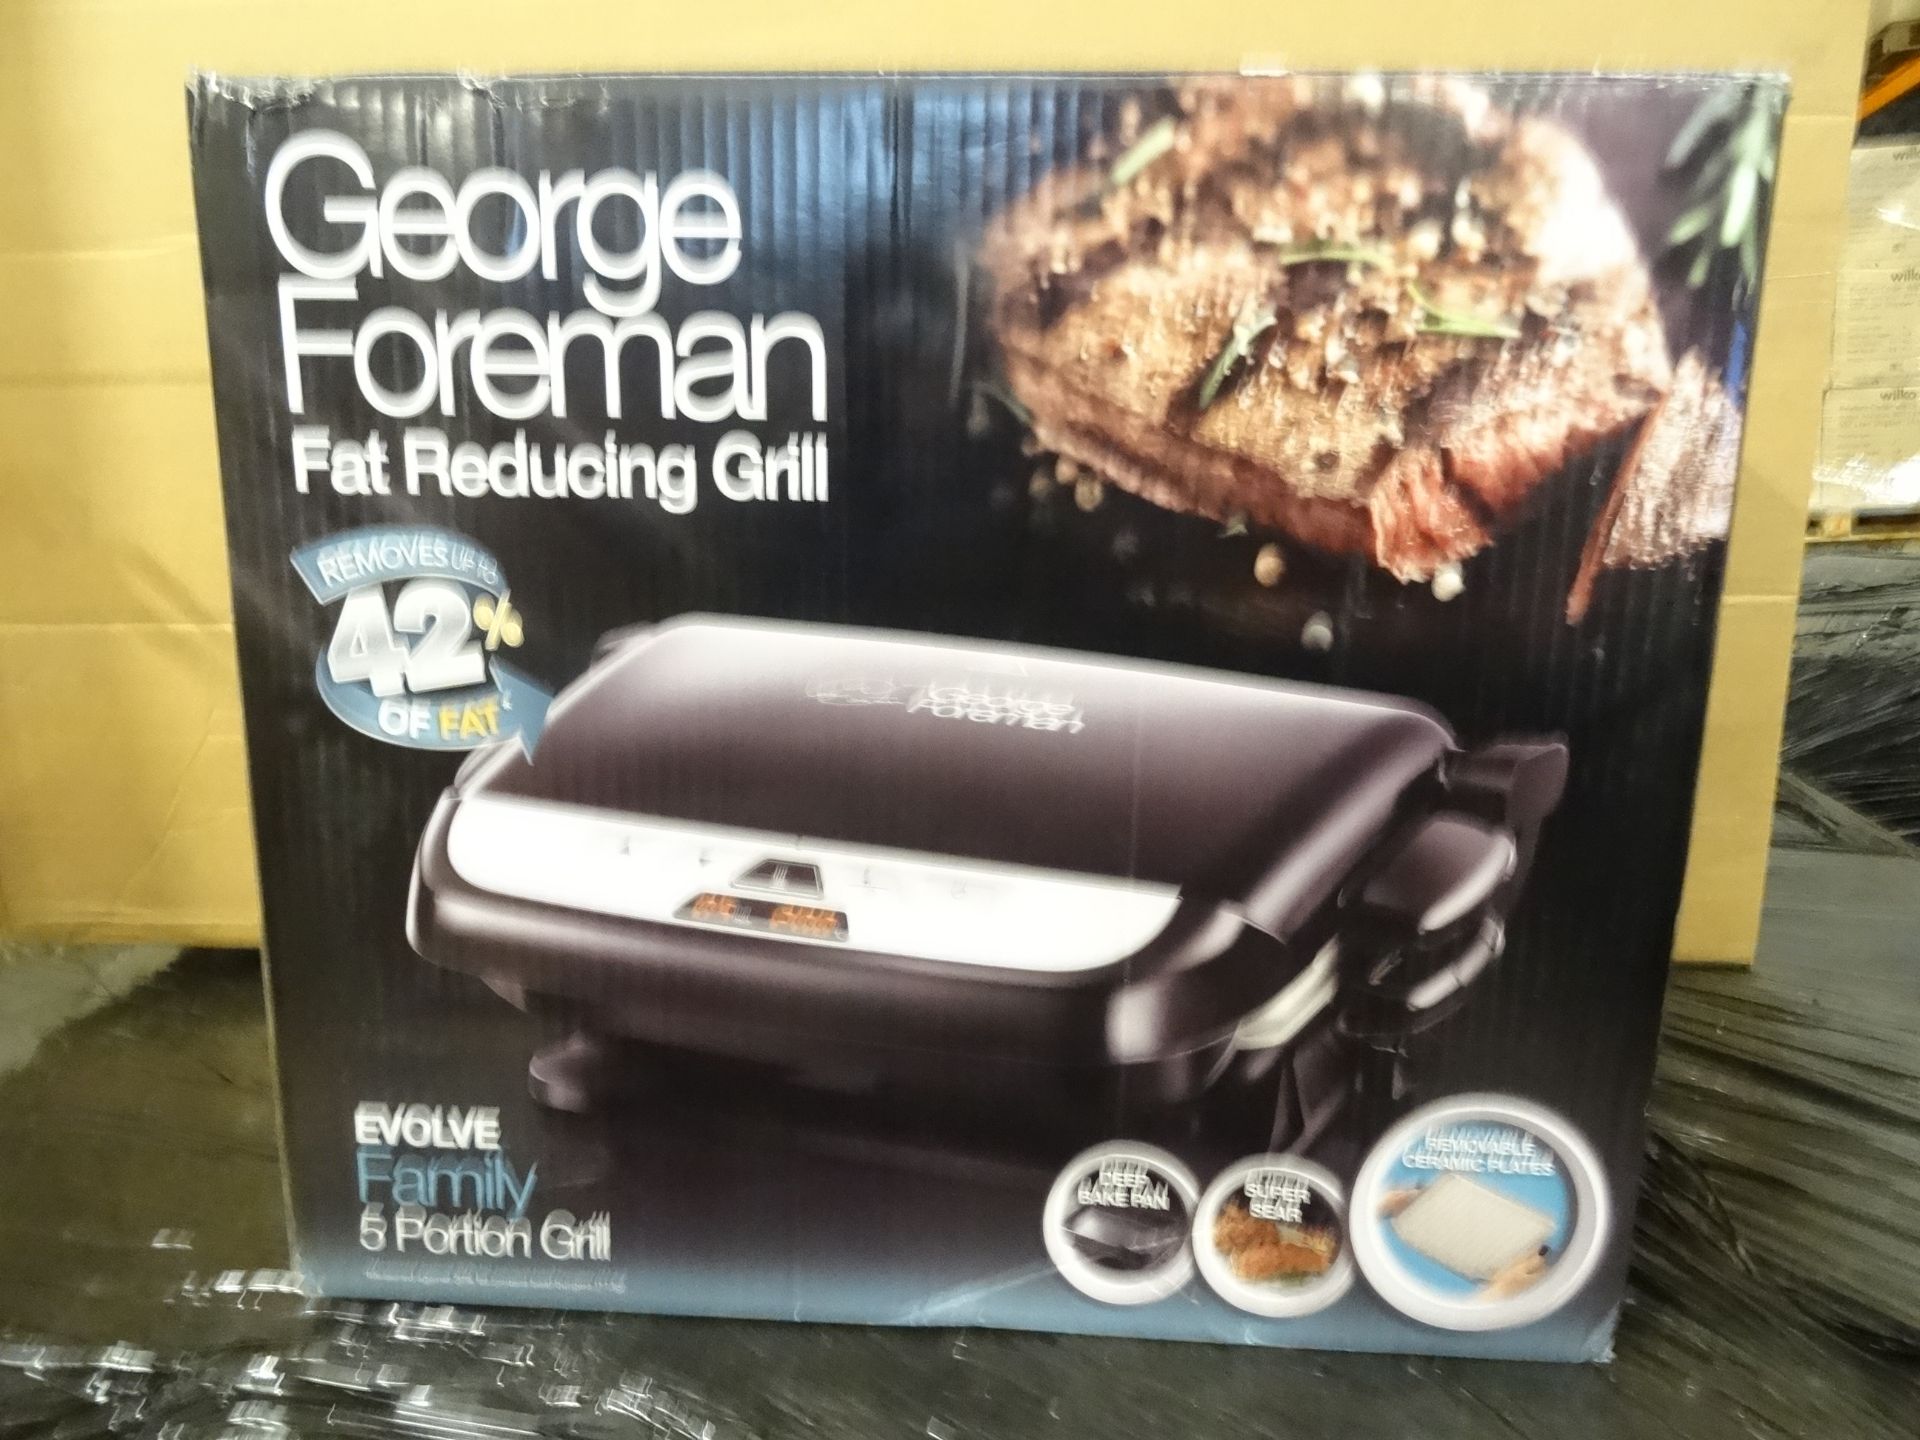 1 x George Foreman Evolve Family 5 Portion Grill. Deep Bake Pan, Super Sear, Removable Ceramic